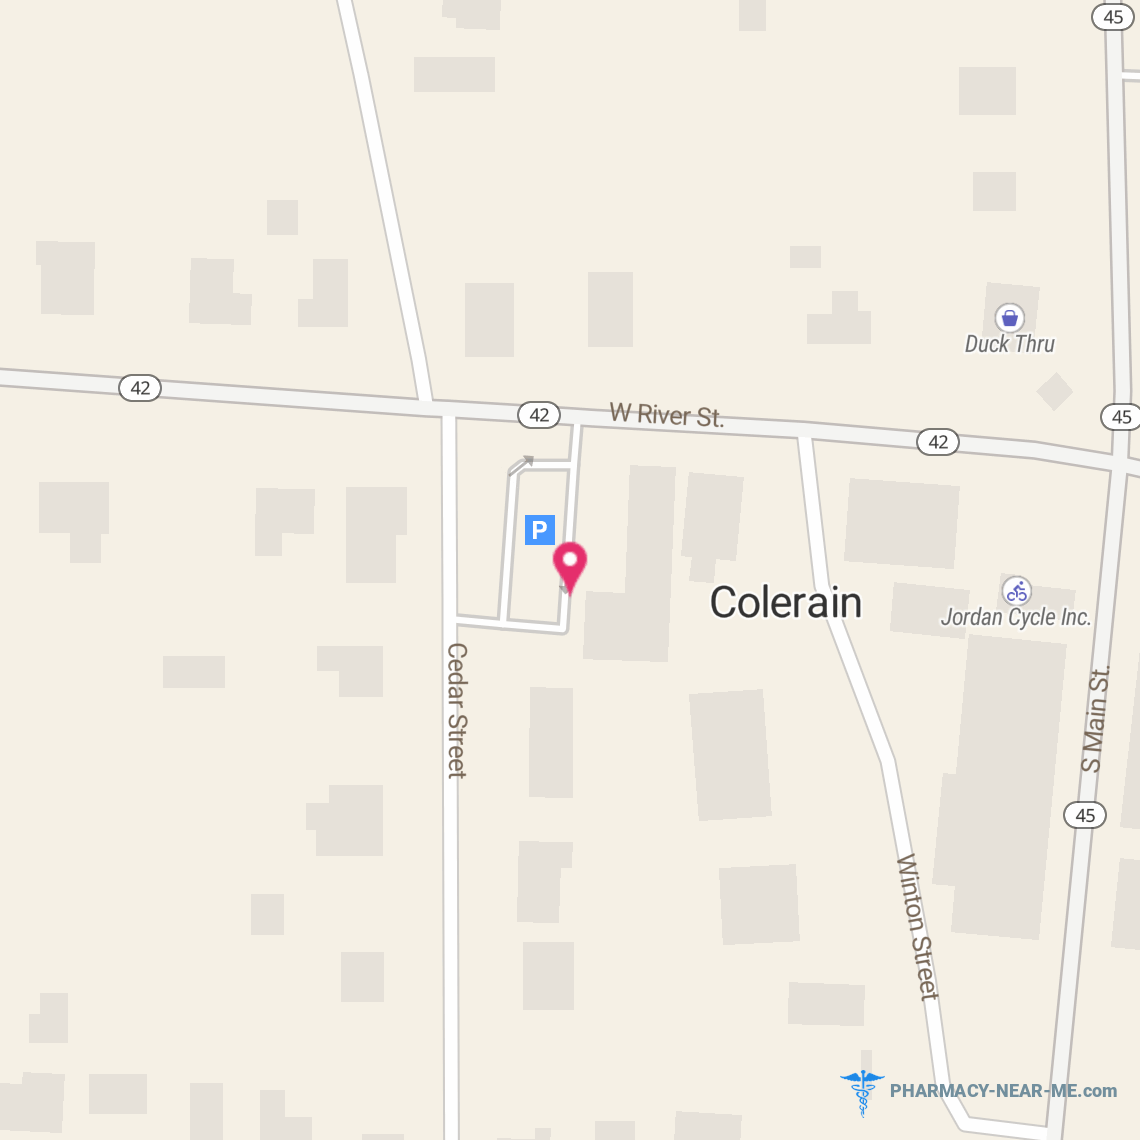 COLERAIN PRIMARY CARE PHARMACY - Pharmacy Hours, Phone, Reviews & Information: 109 West River Street, Colerain, North Carolina 27924, United States